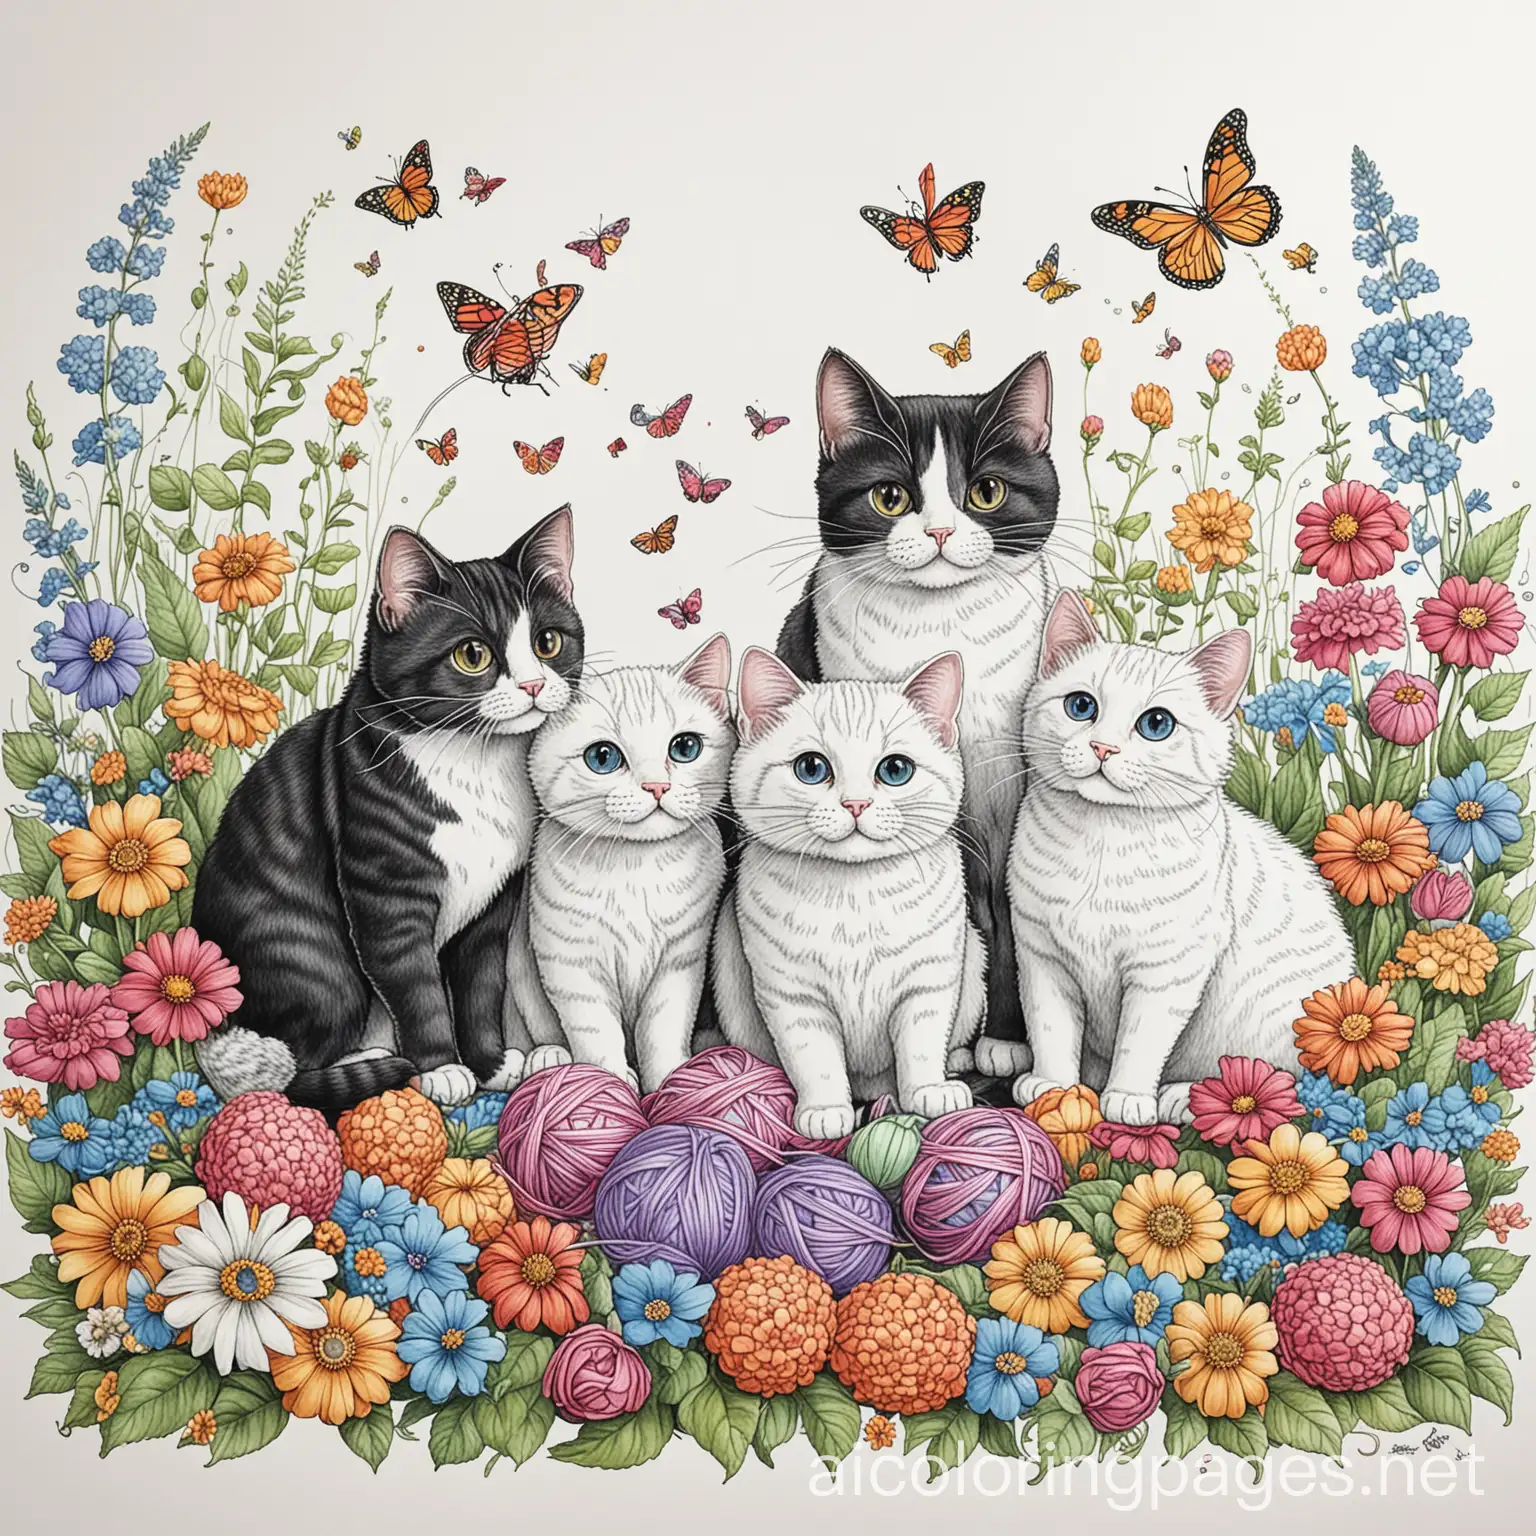 Whimsical-Cats-Playing-with-Yarn-and-Flowers-Coloring-Page